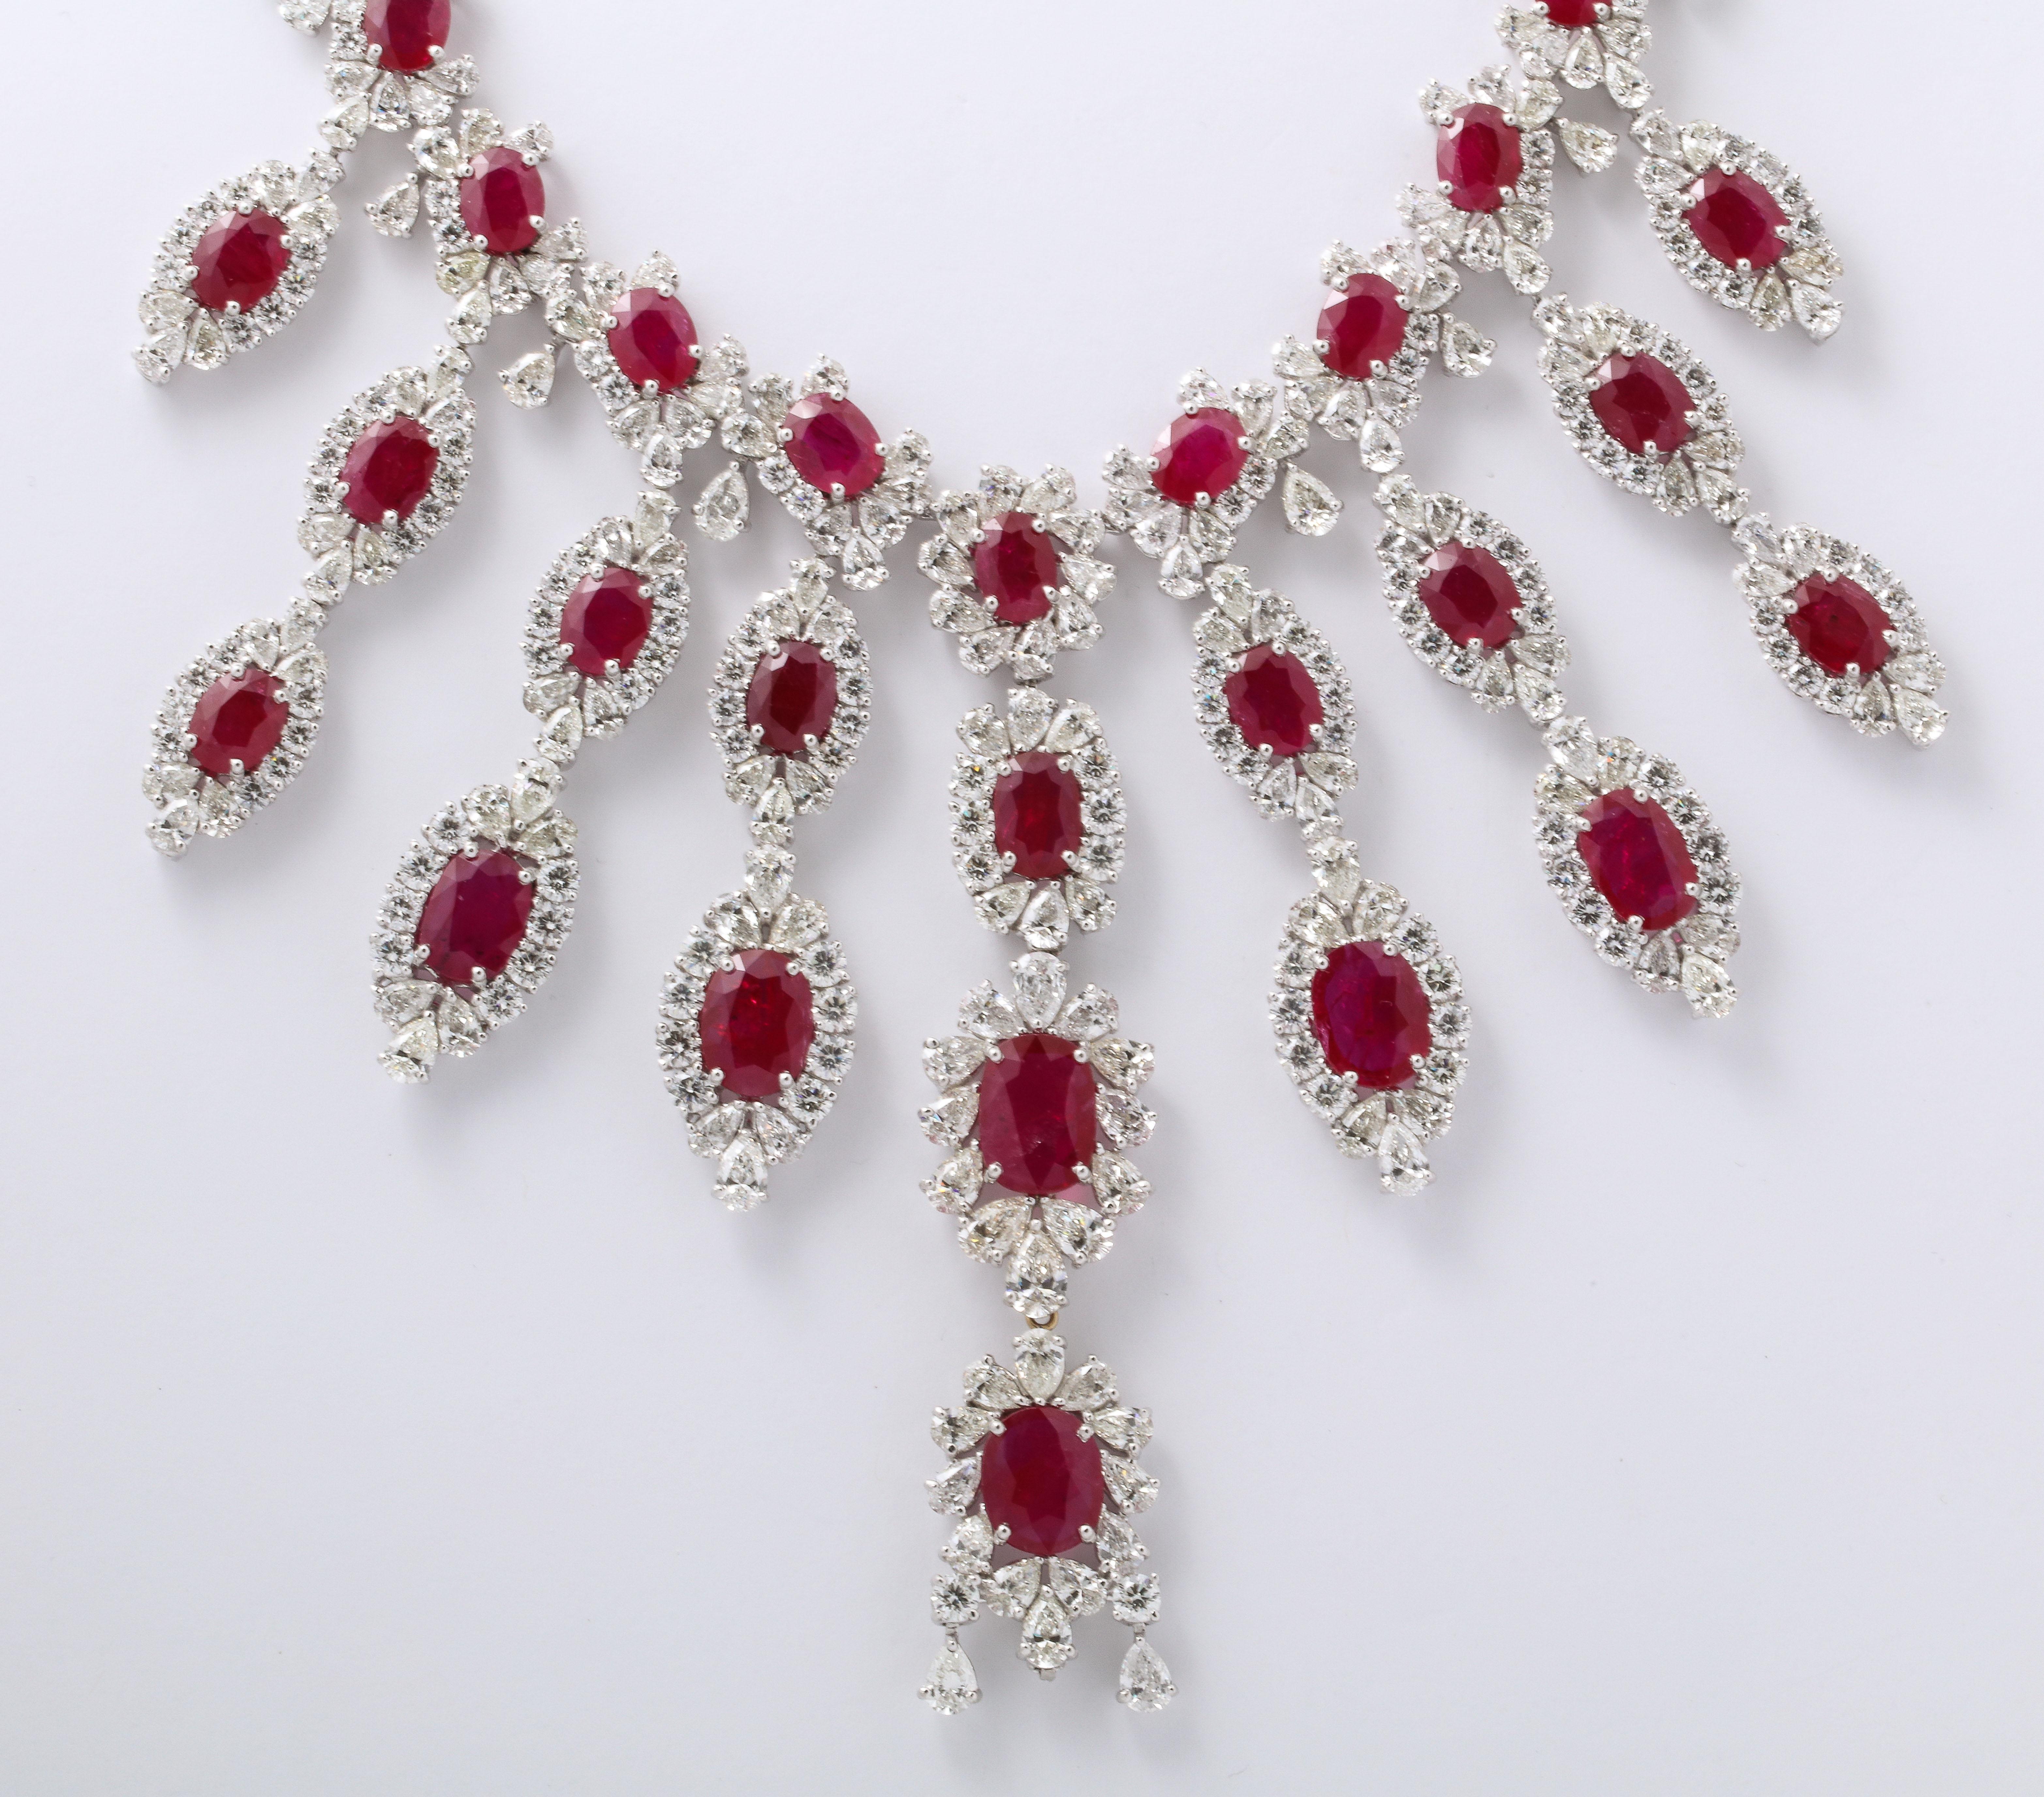 
A GRAND Ruby and Diamond Necklace. 

Over 100 carats of certified 